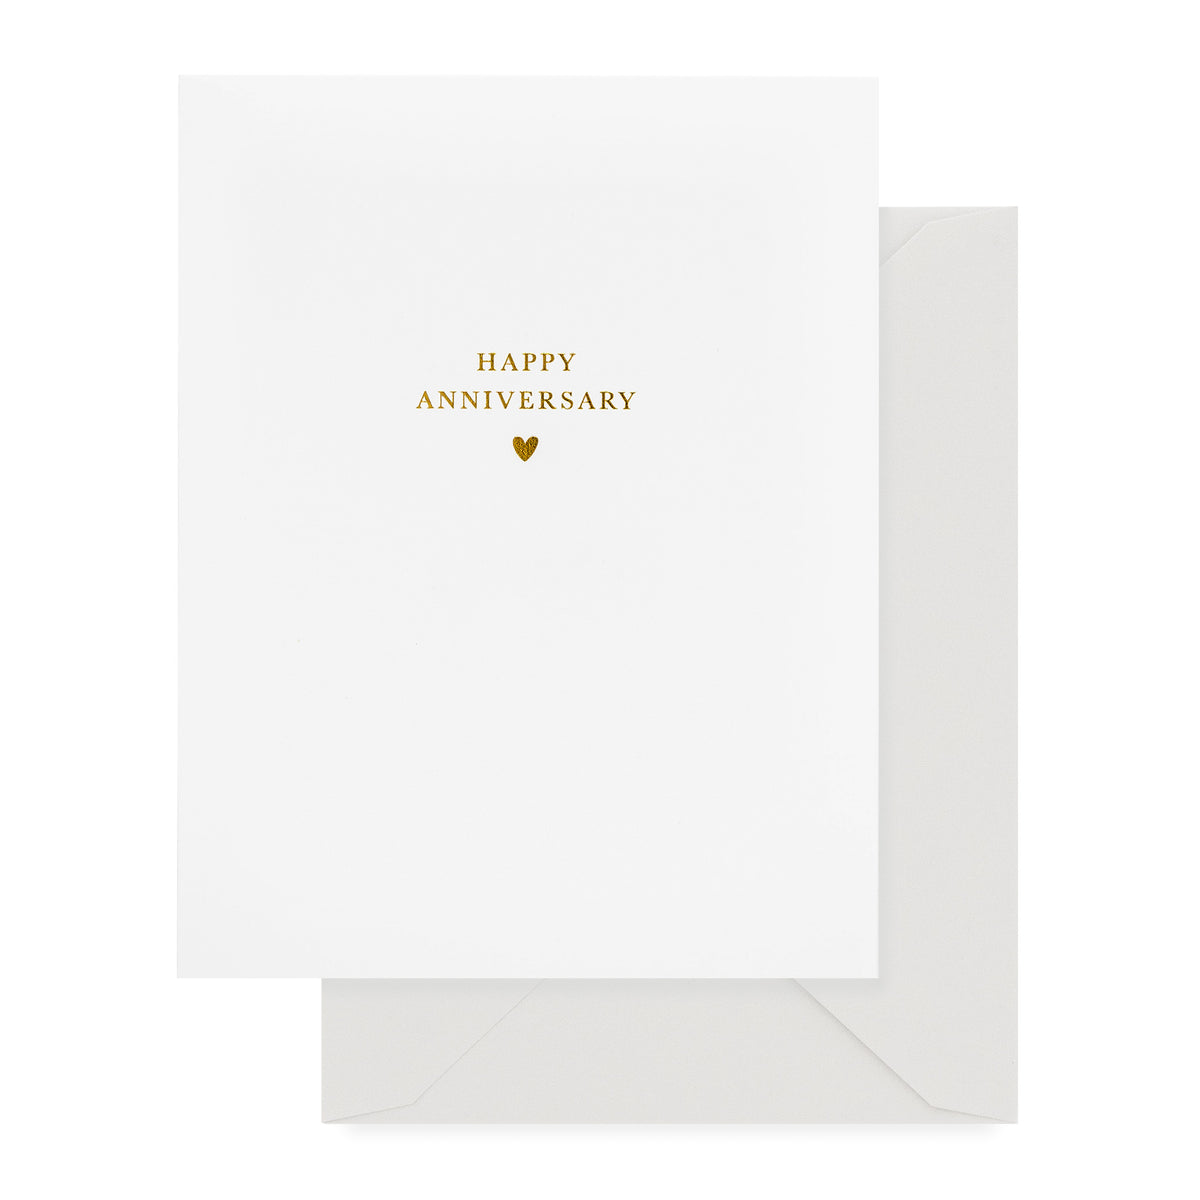 white anniversary card with gold foil text and antique grey envelope